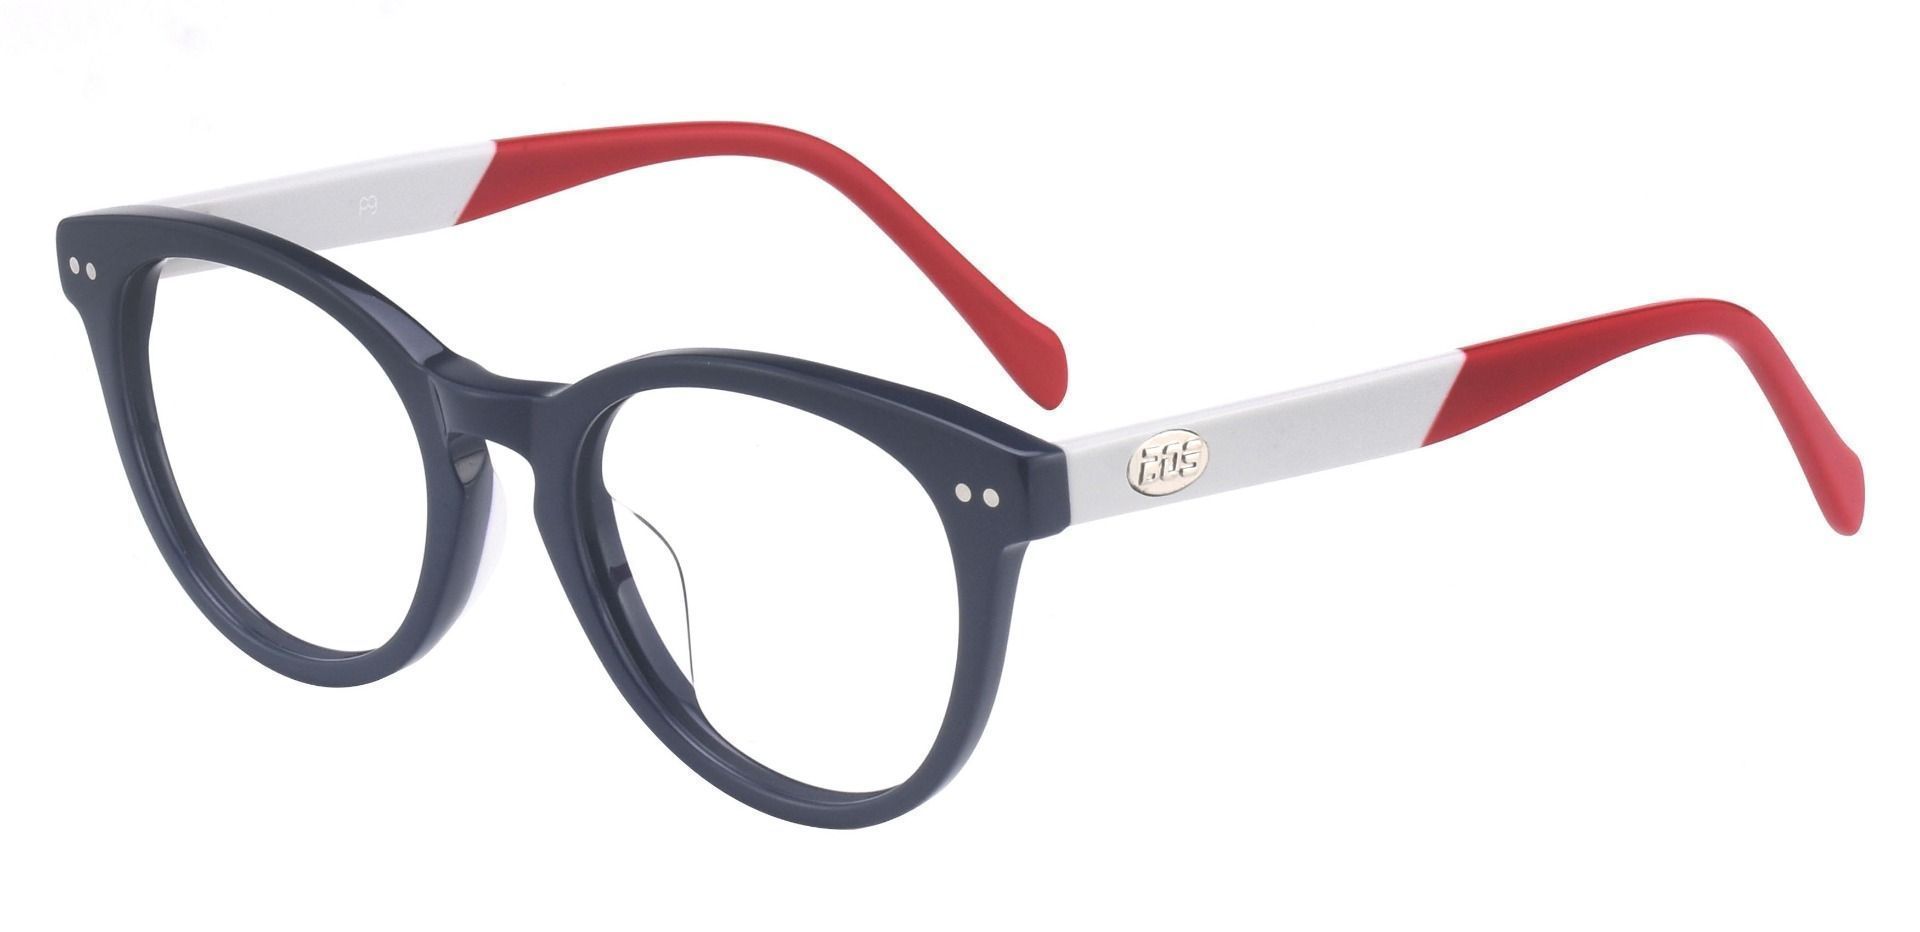 Revere Oval Reading Glasses - The Frame Is Blue And Red